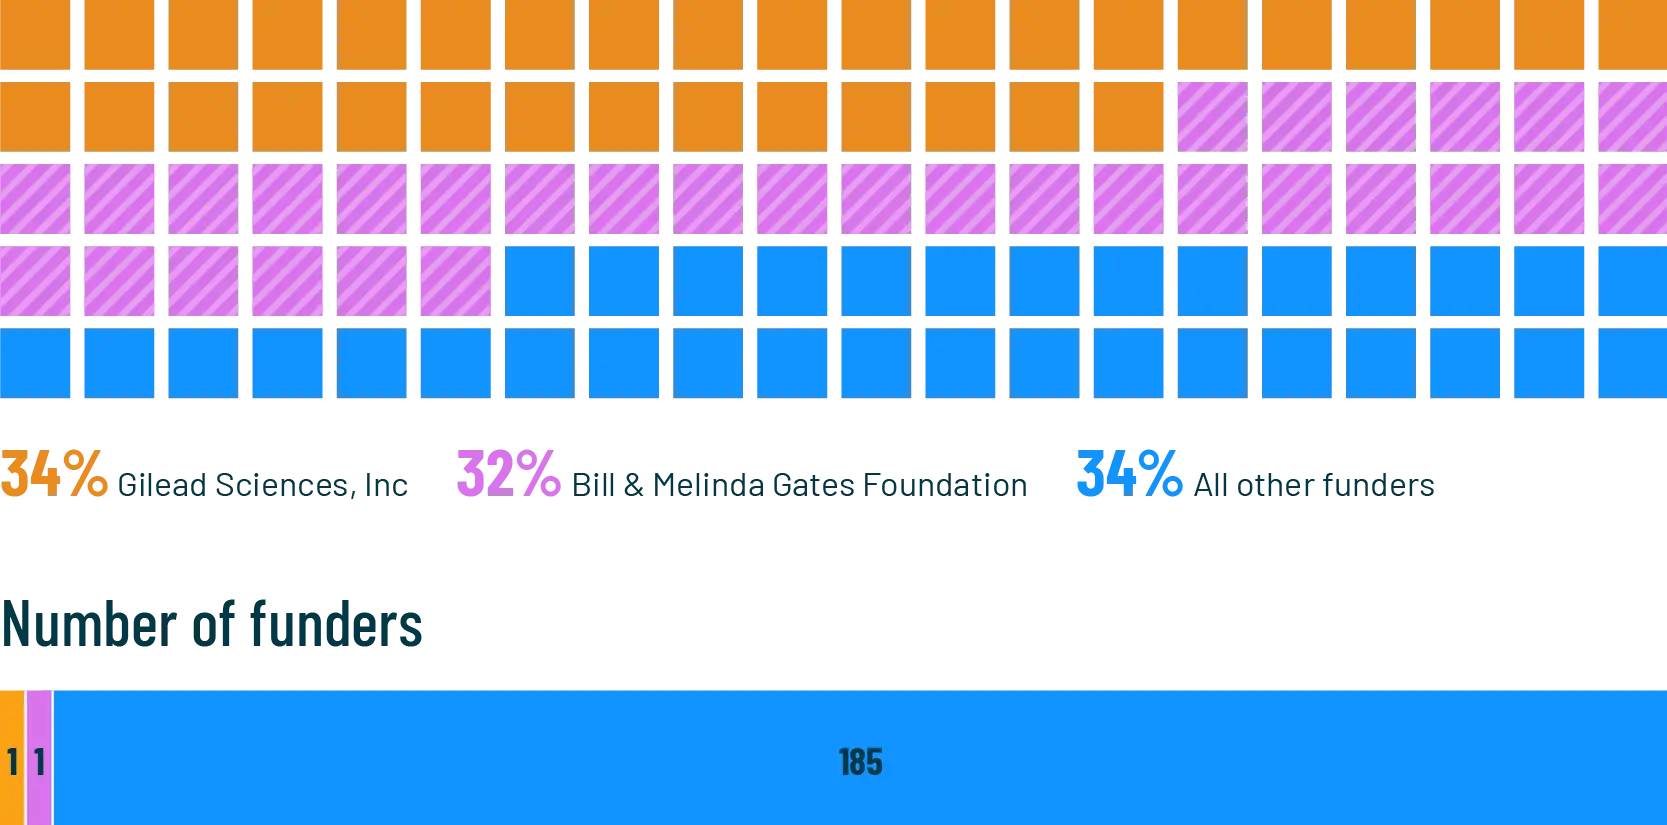 2021 Distribution of HIV-related Philanthropic Funding (by percentage of total disbursements)